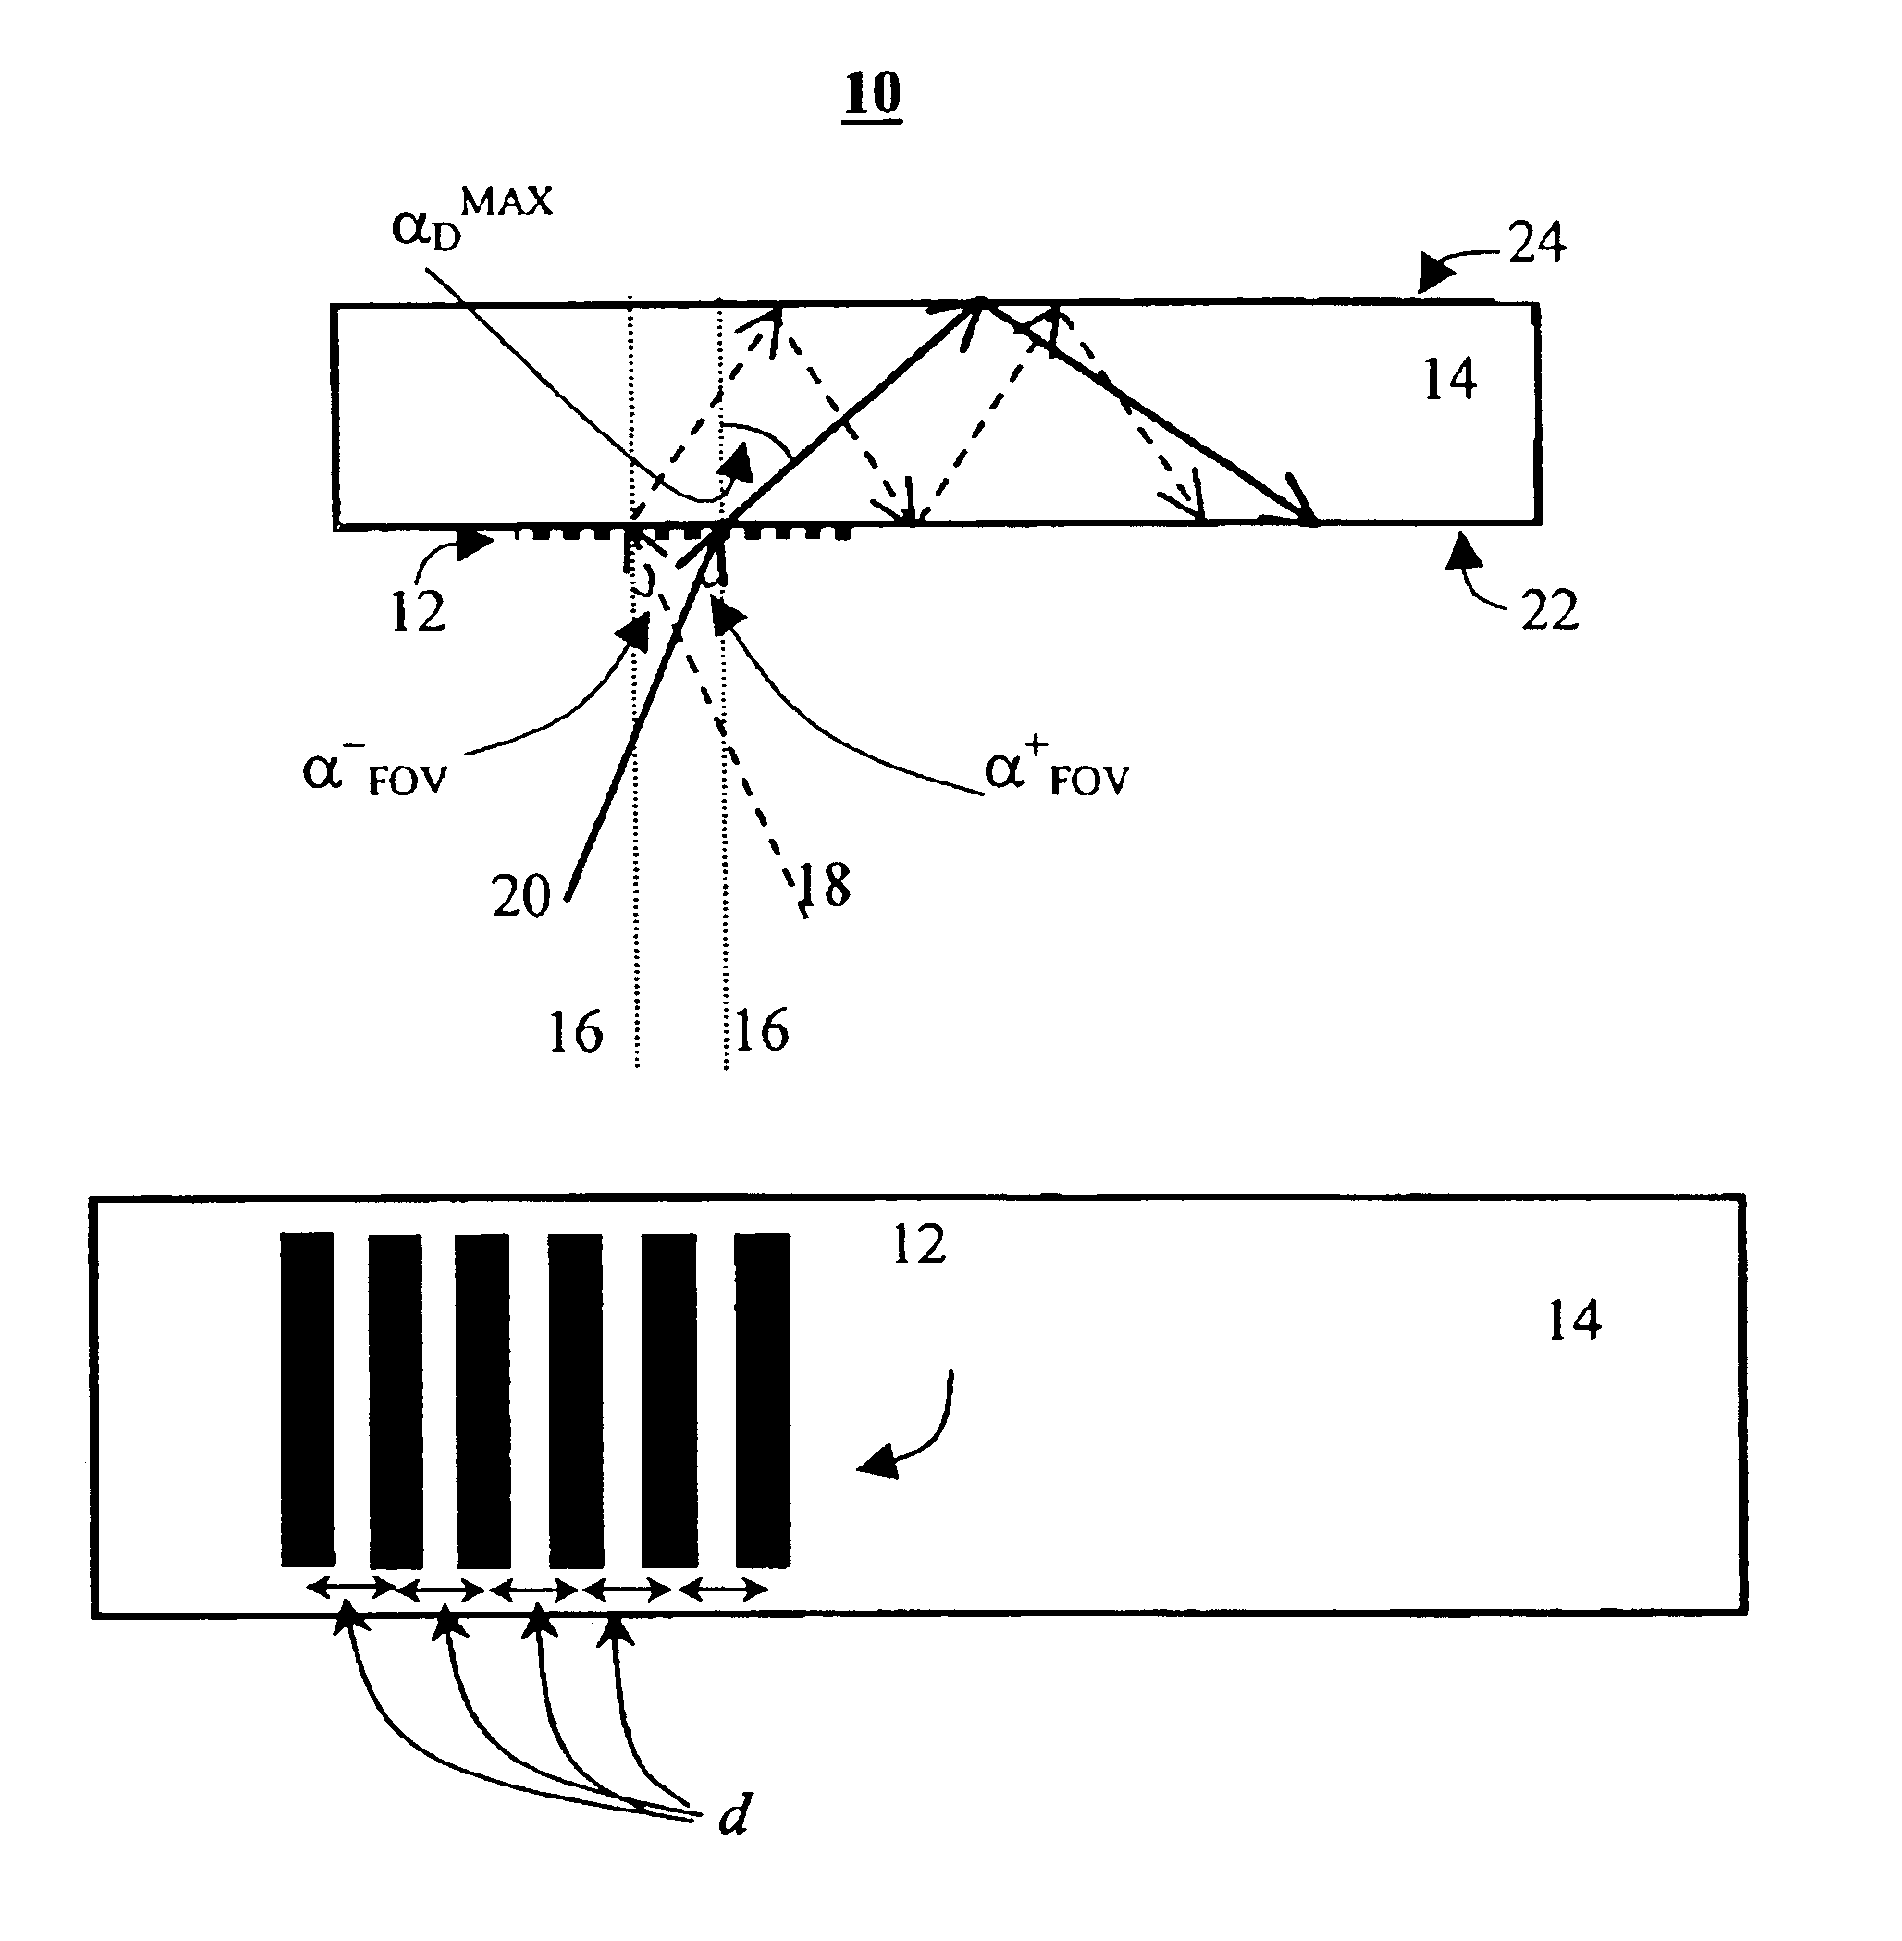 Optical device having a wide field-of-view for multicolor images